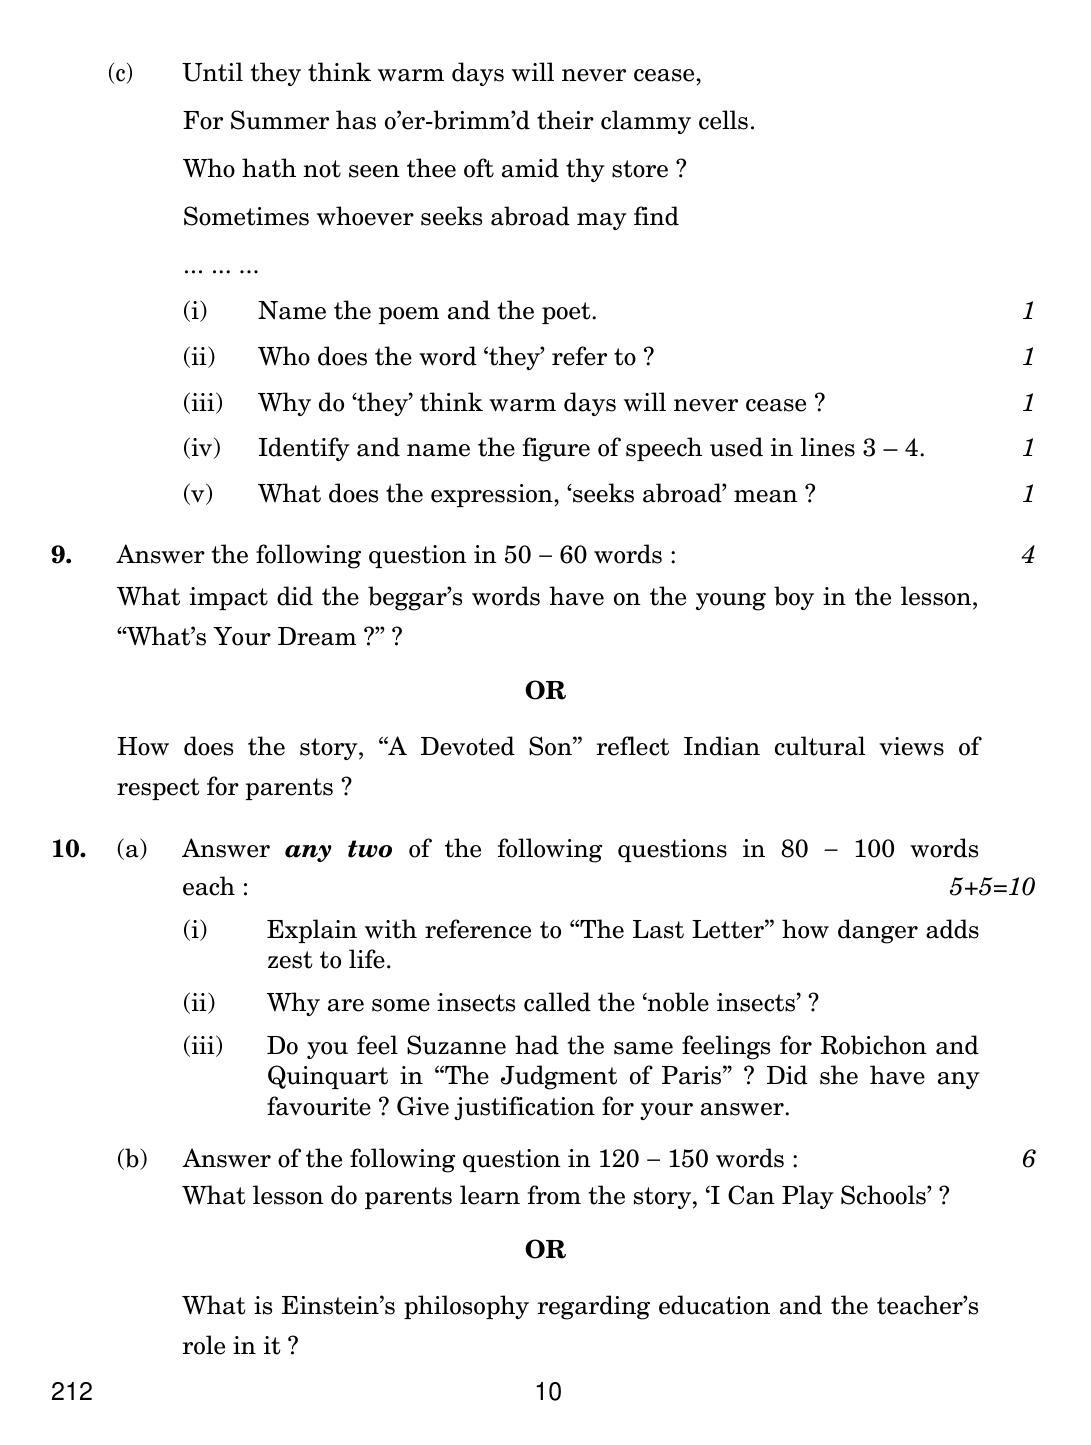 CBSE Class 12 212 ENGLISH ELECTIVE - C 2019 Compartment Question Paper - Page 10